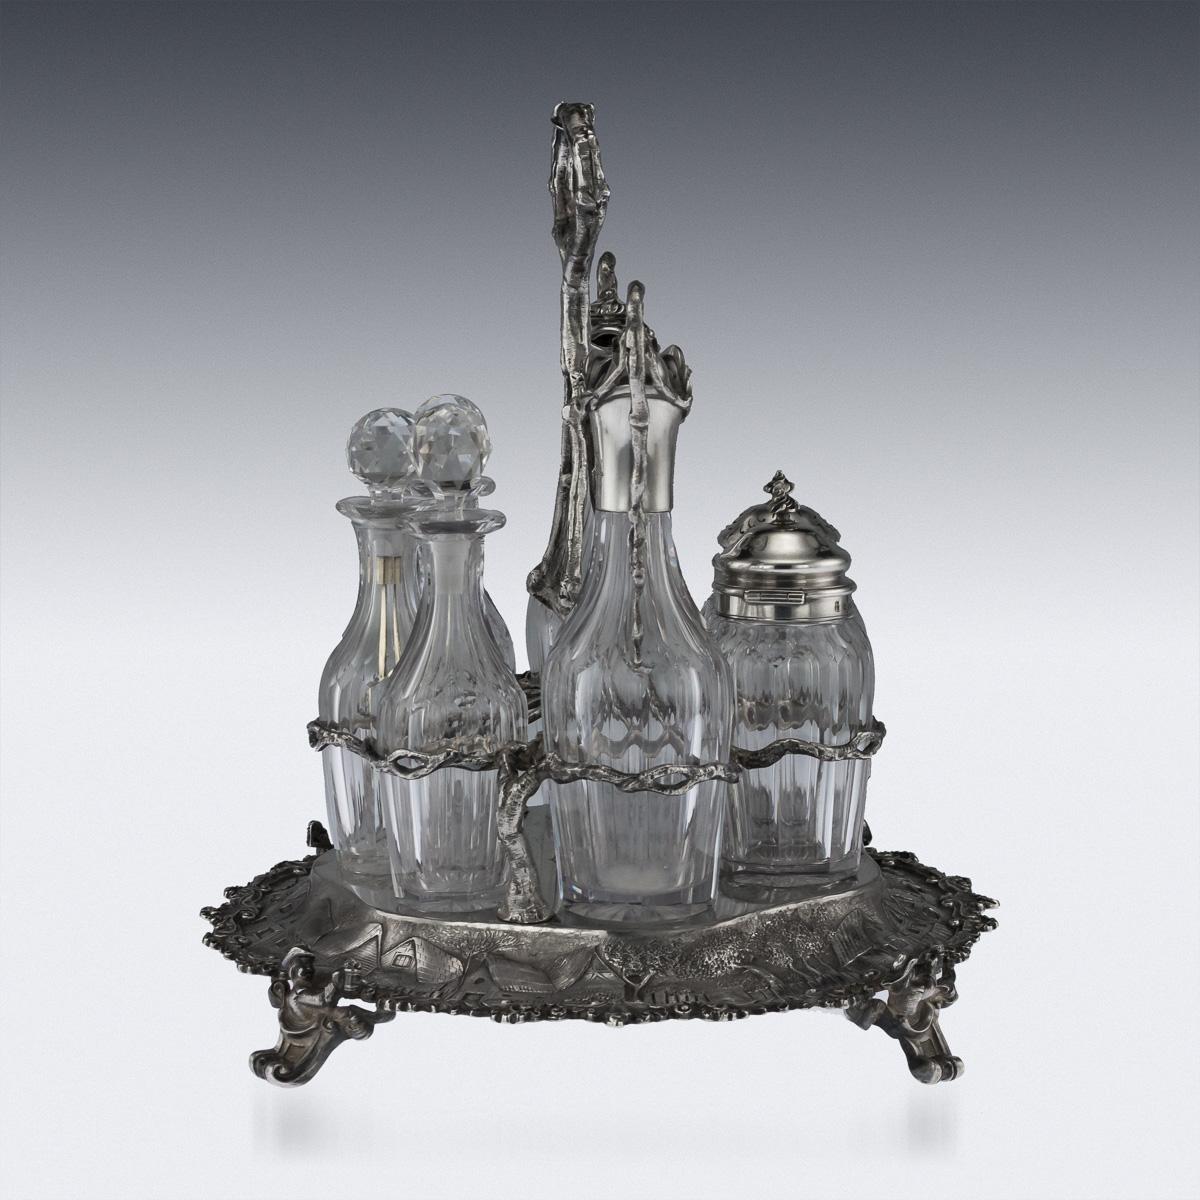 Description

Antique 19th century Victorian extremely rare solid silver & glass condiment set, comprising a cruet Stand, five sauce bottles and two silver lidded condiment jars, made in the 'Teniers' style, (a renowned Dutch painter), the base of